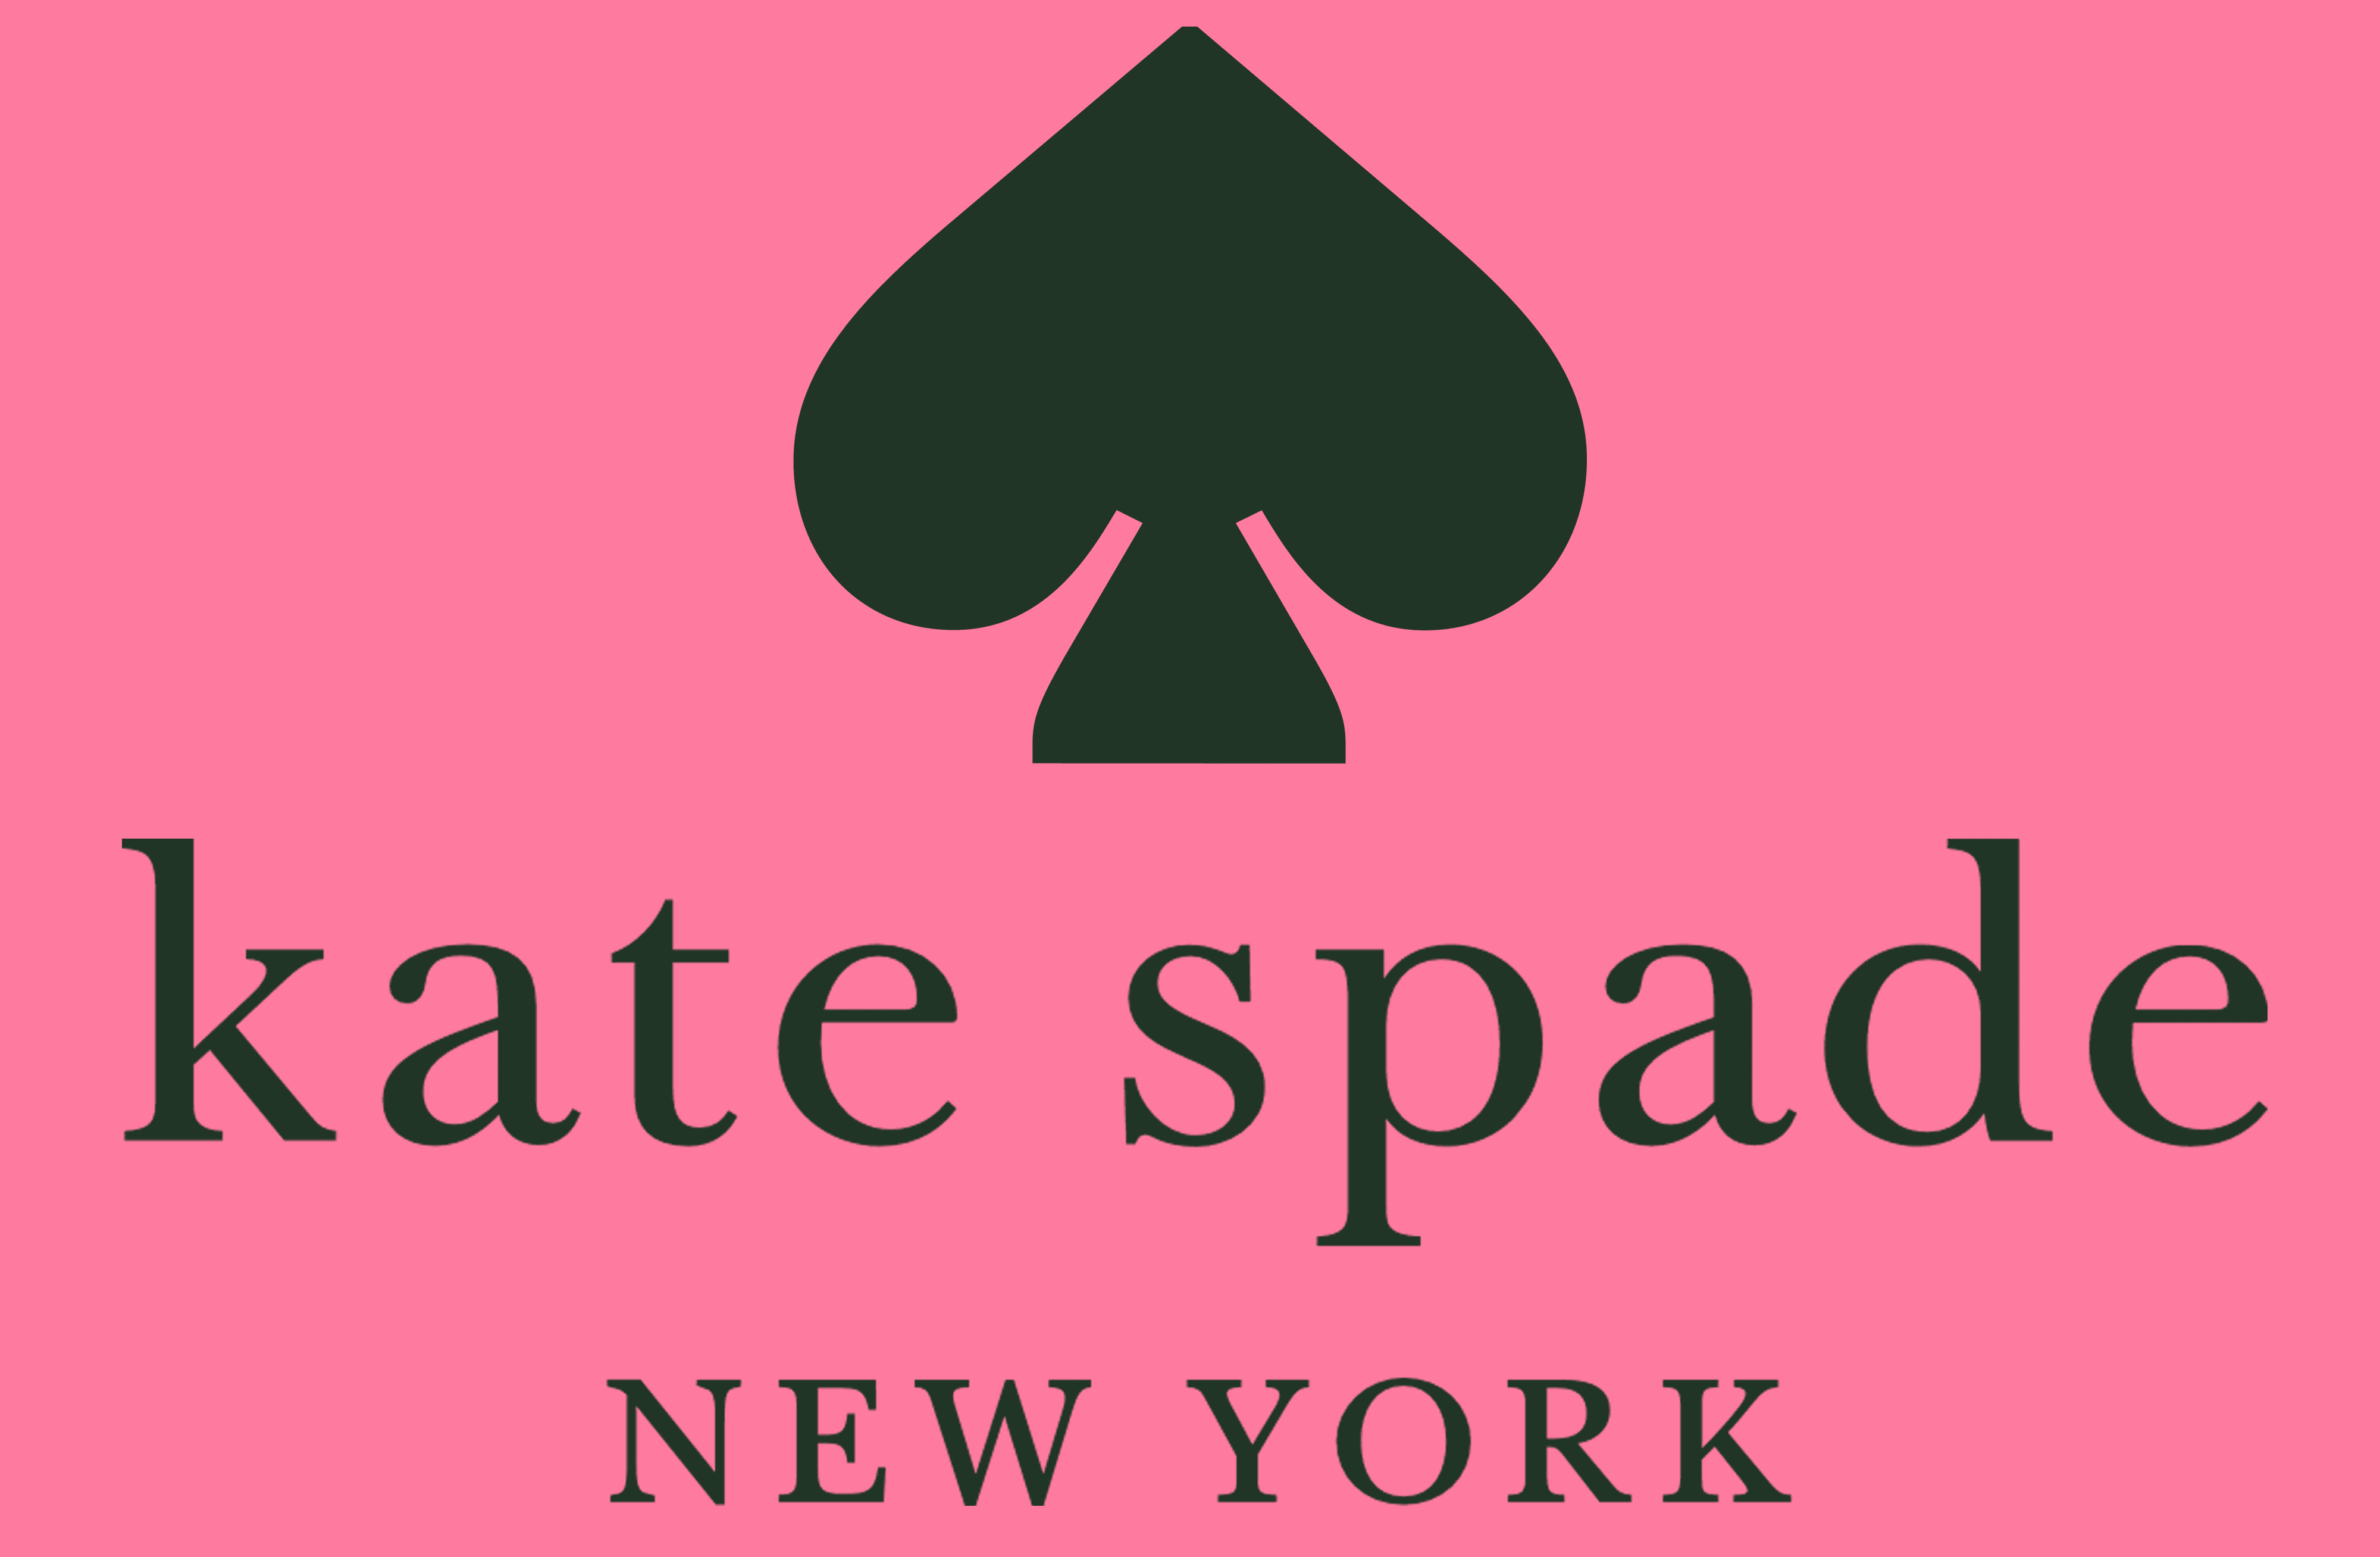 50% OFF outlet, plus further 10% OFF @ Kate Spade